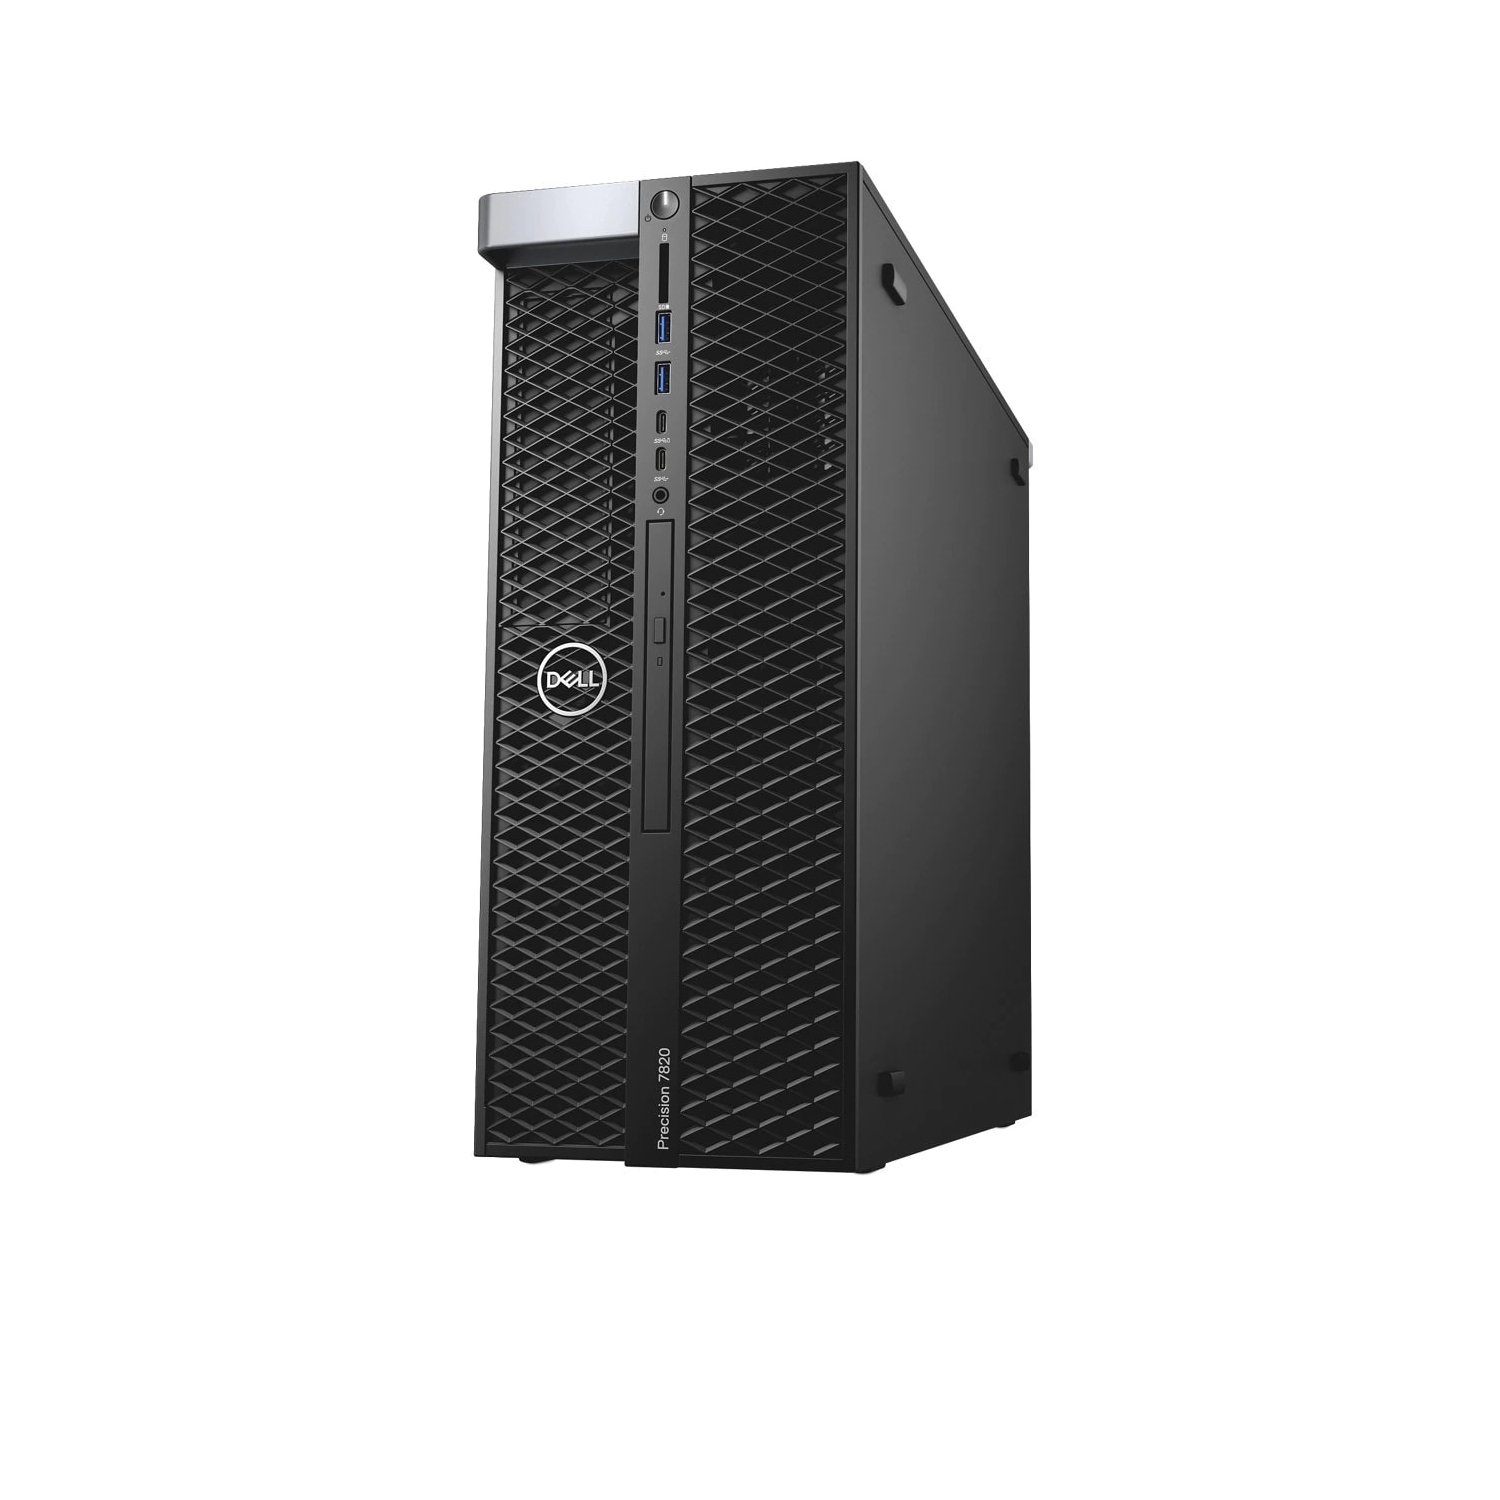 Refurbished (Excellent) - Dell Precision T7820 Workstation Desktop (2018), Core Xeon Silver, 1TB SSD + 1TB HDD, 64GB RAM, RTX 4000, 10 Cores @ 3.2 GHz Certified